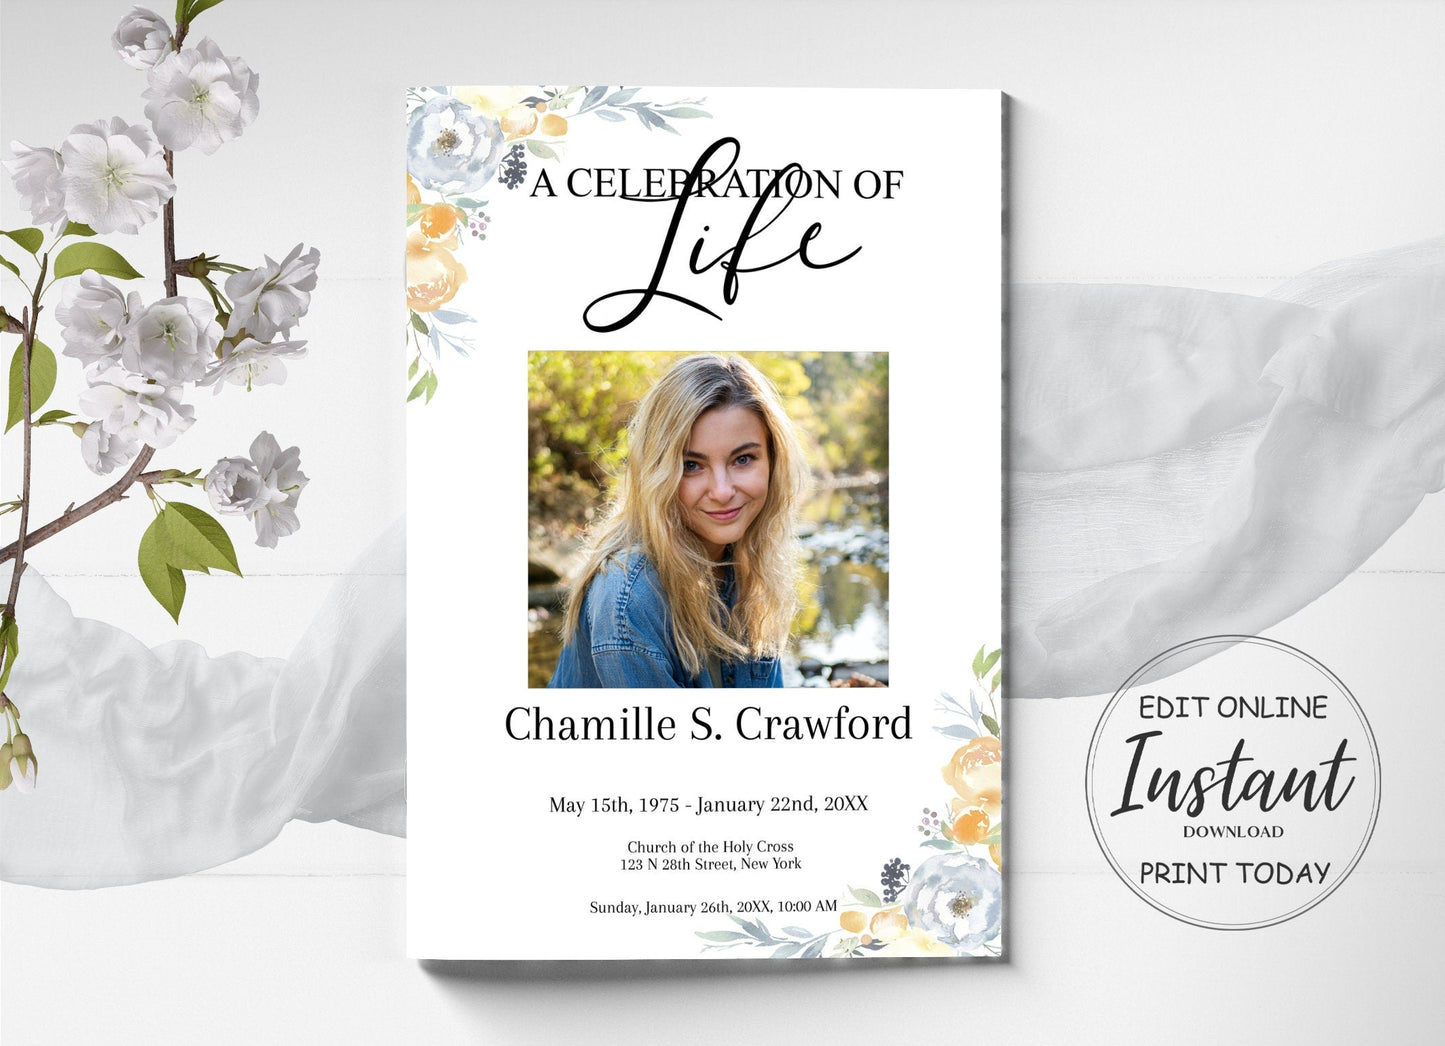 Funeral Program Template for Woman | Yellow Floral Obituary Template | Floral Celebration of Life Program |  A106